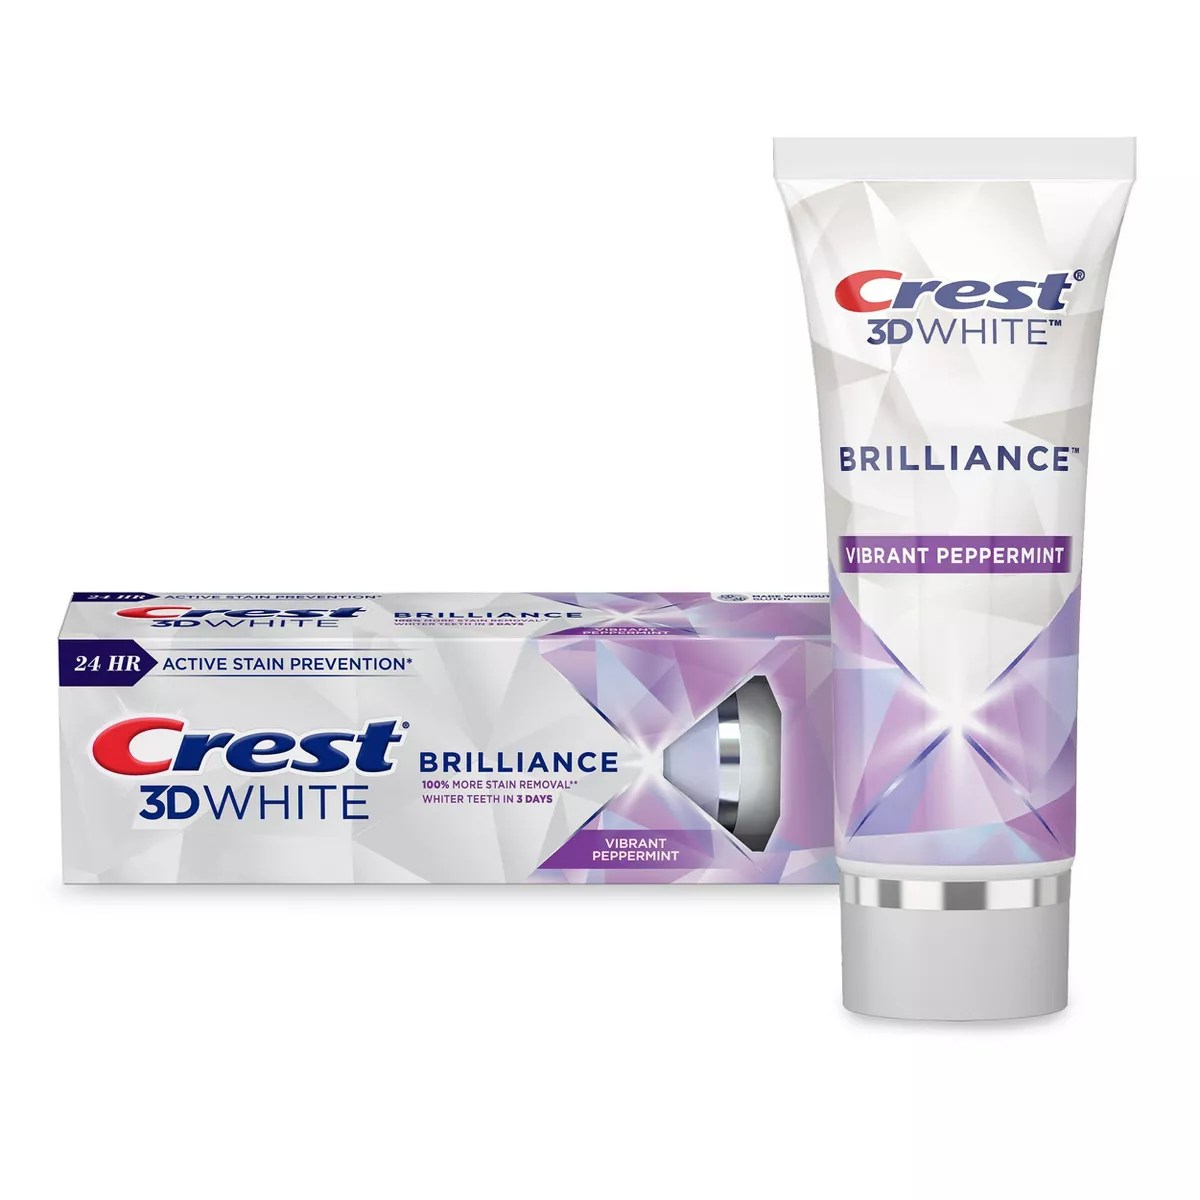 A package of crest 3d white brilliance, one of the best whitening toothpastes